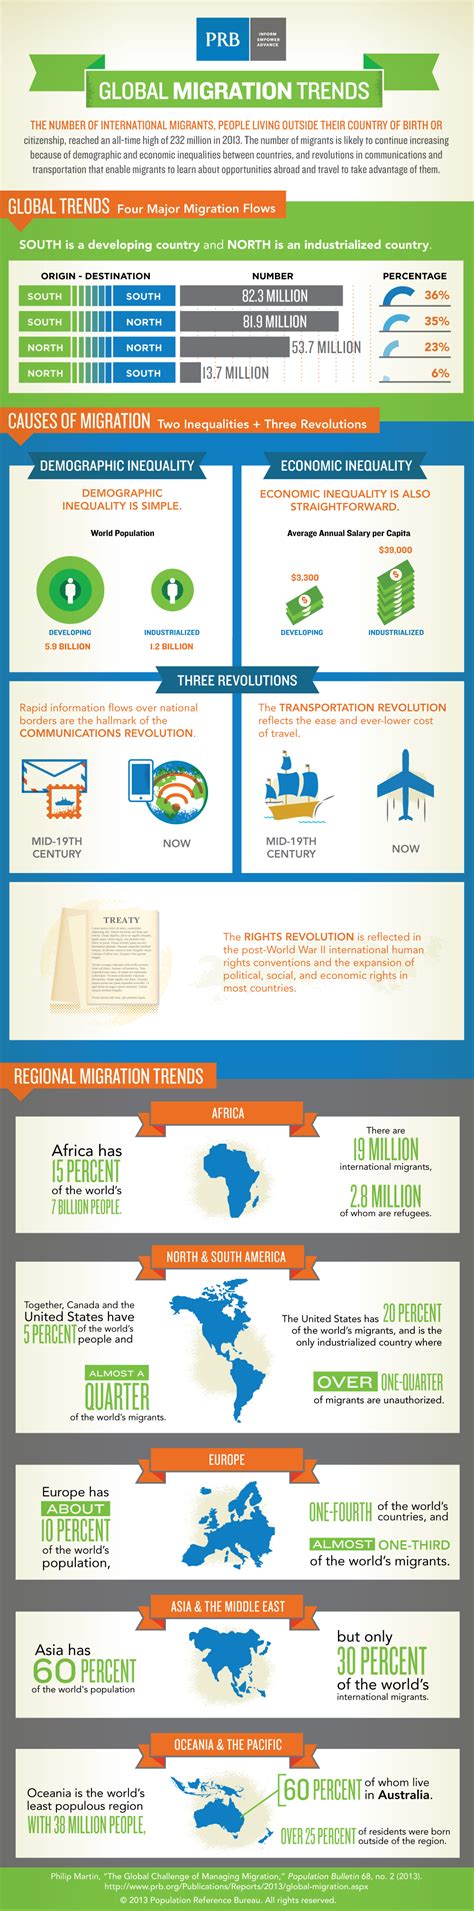 Global Migration Trends Infographic Prb